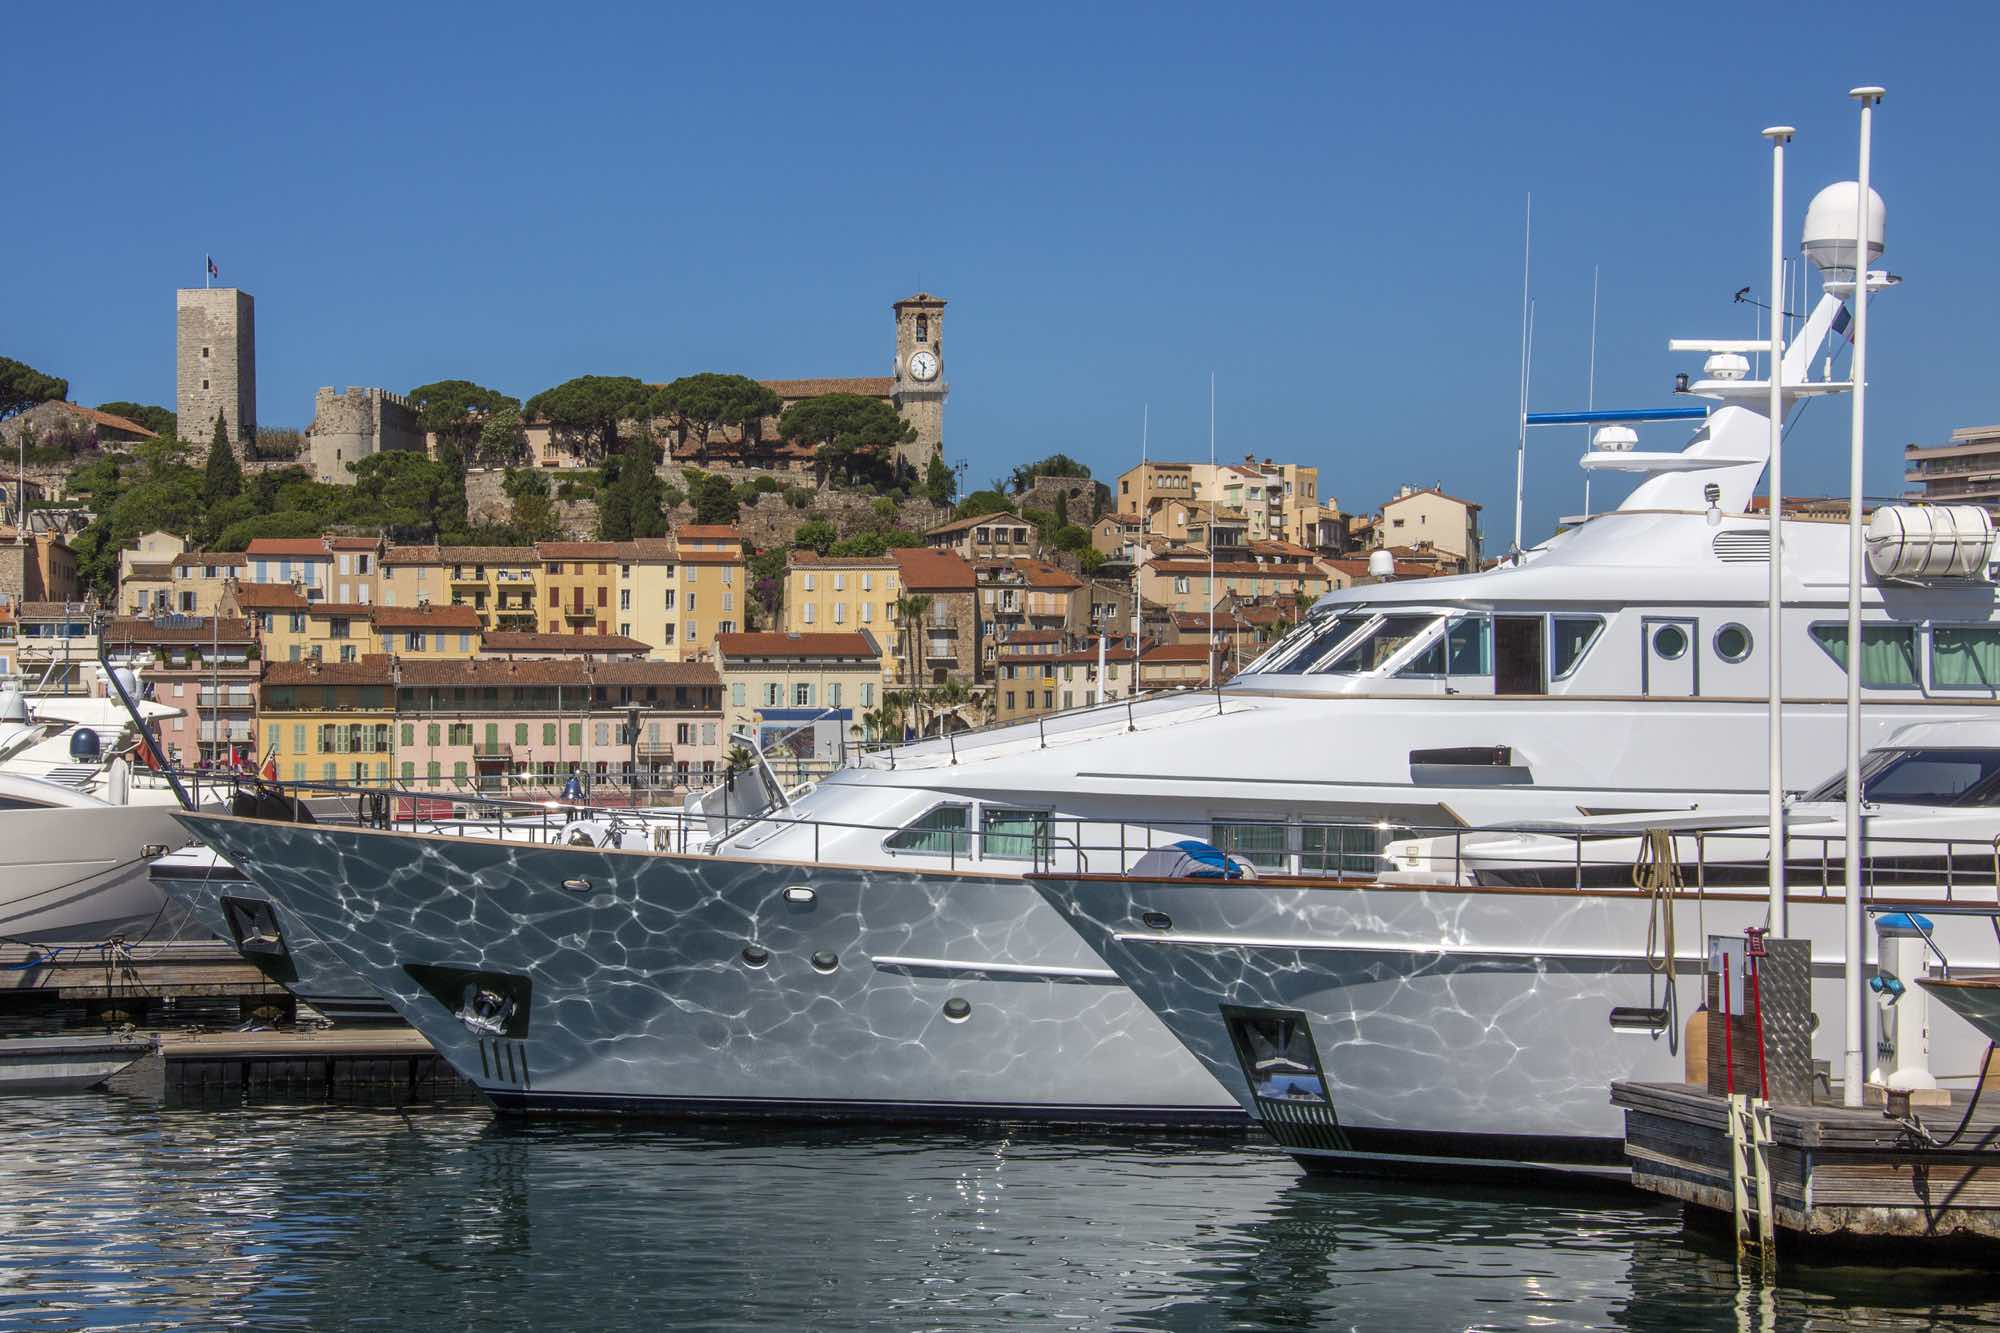 Hire a Yacht rental tips